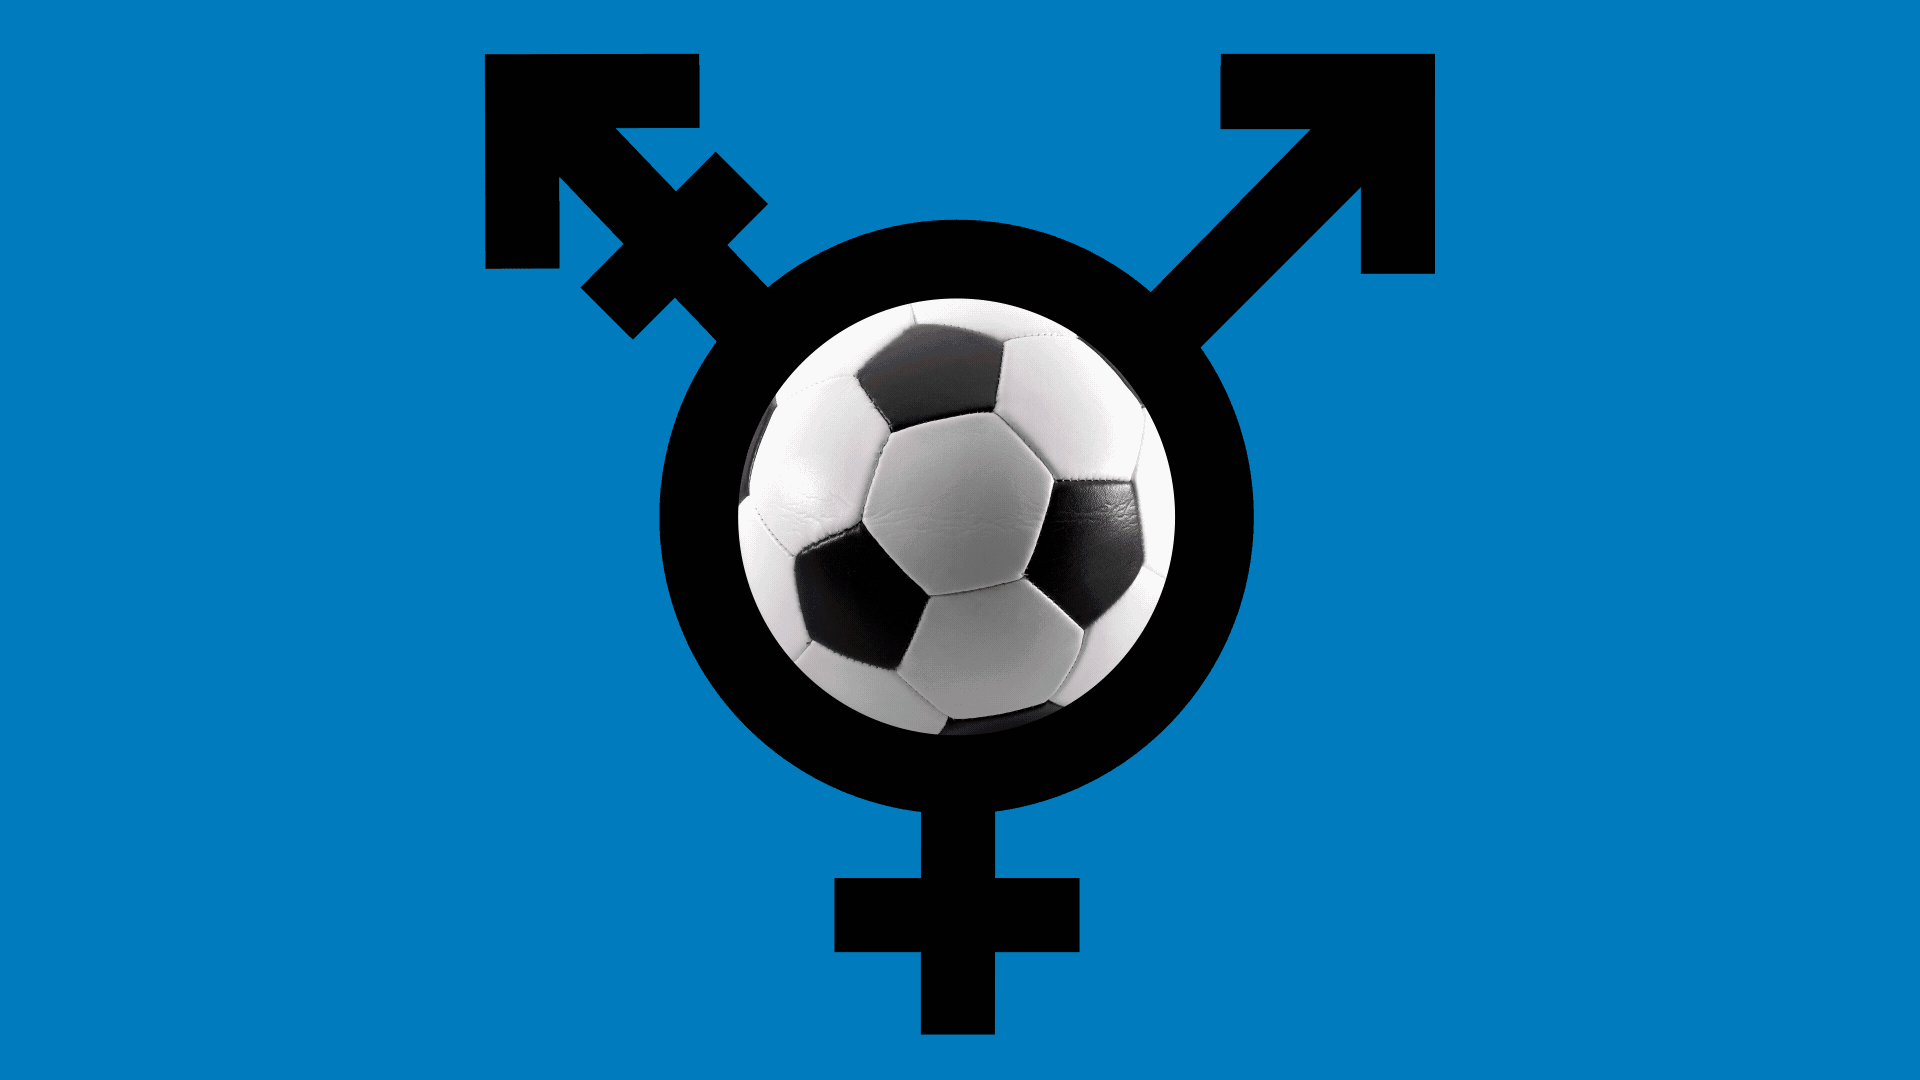 Illustration of a transgender symbol with a soccer ball, tennis ball, basketball, and baseball cycling through the circle in the middle.